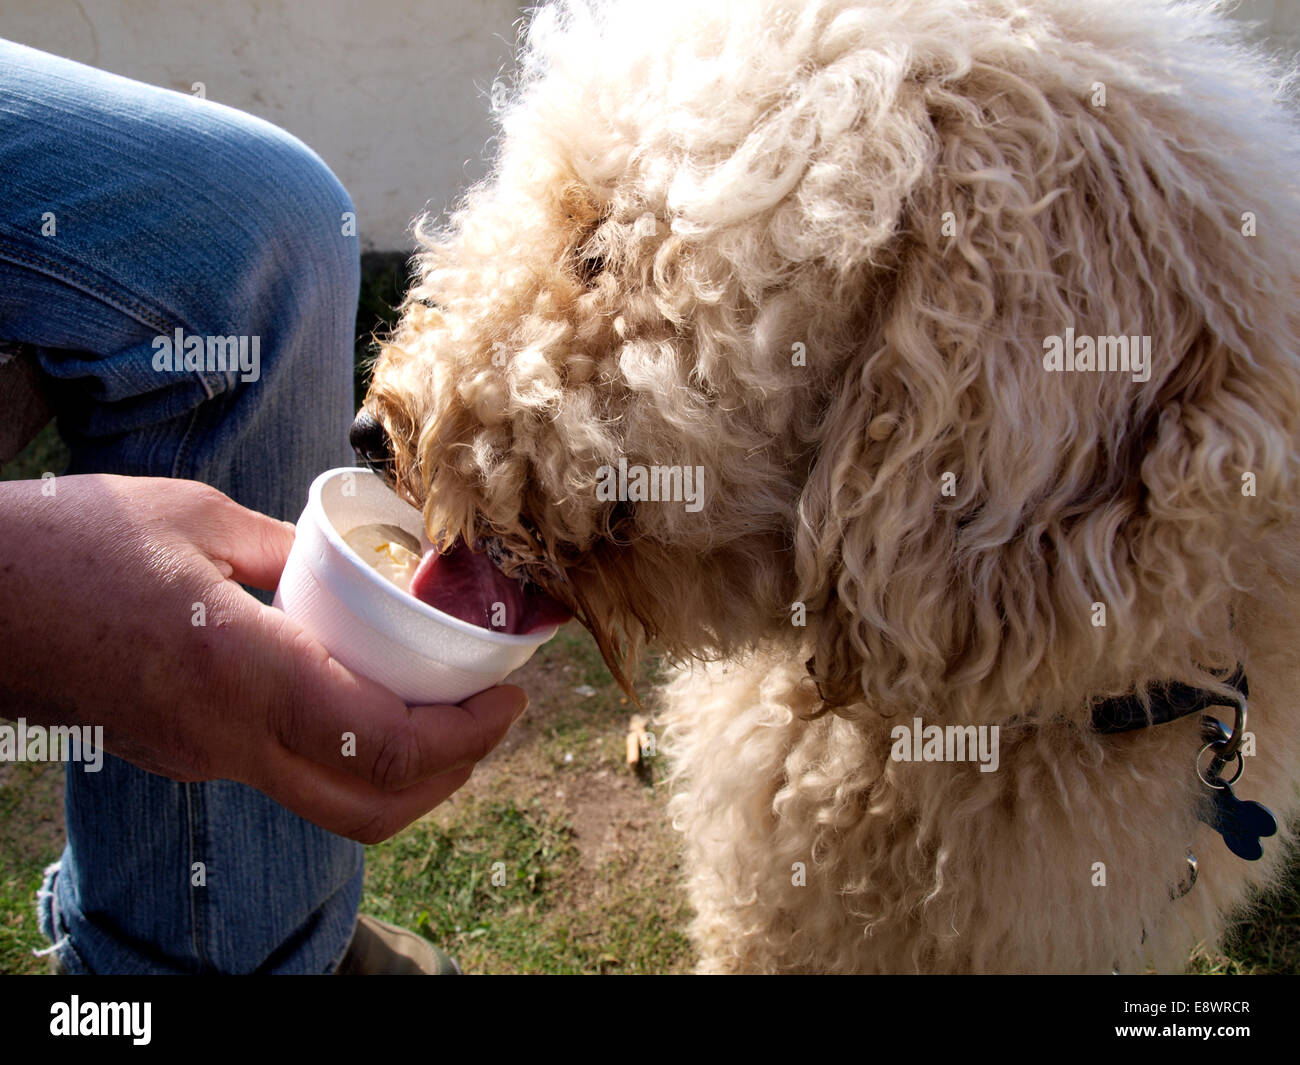 Labradoodle dog licking ice cream from a tub, UK Stock Photo